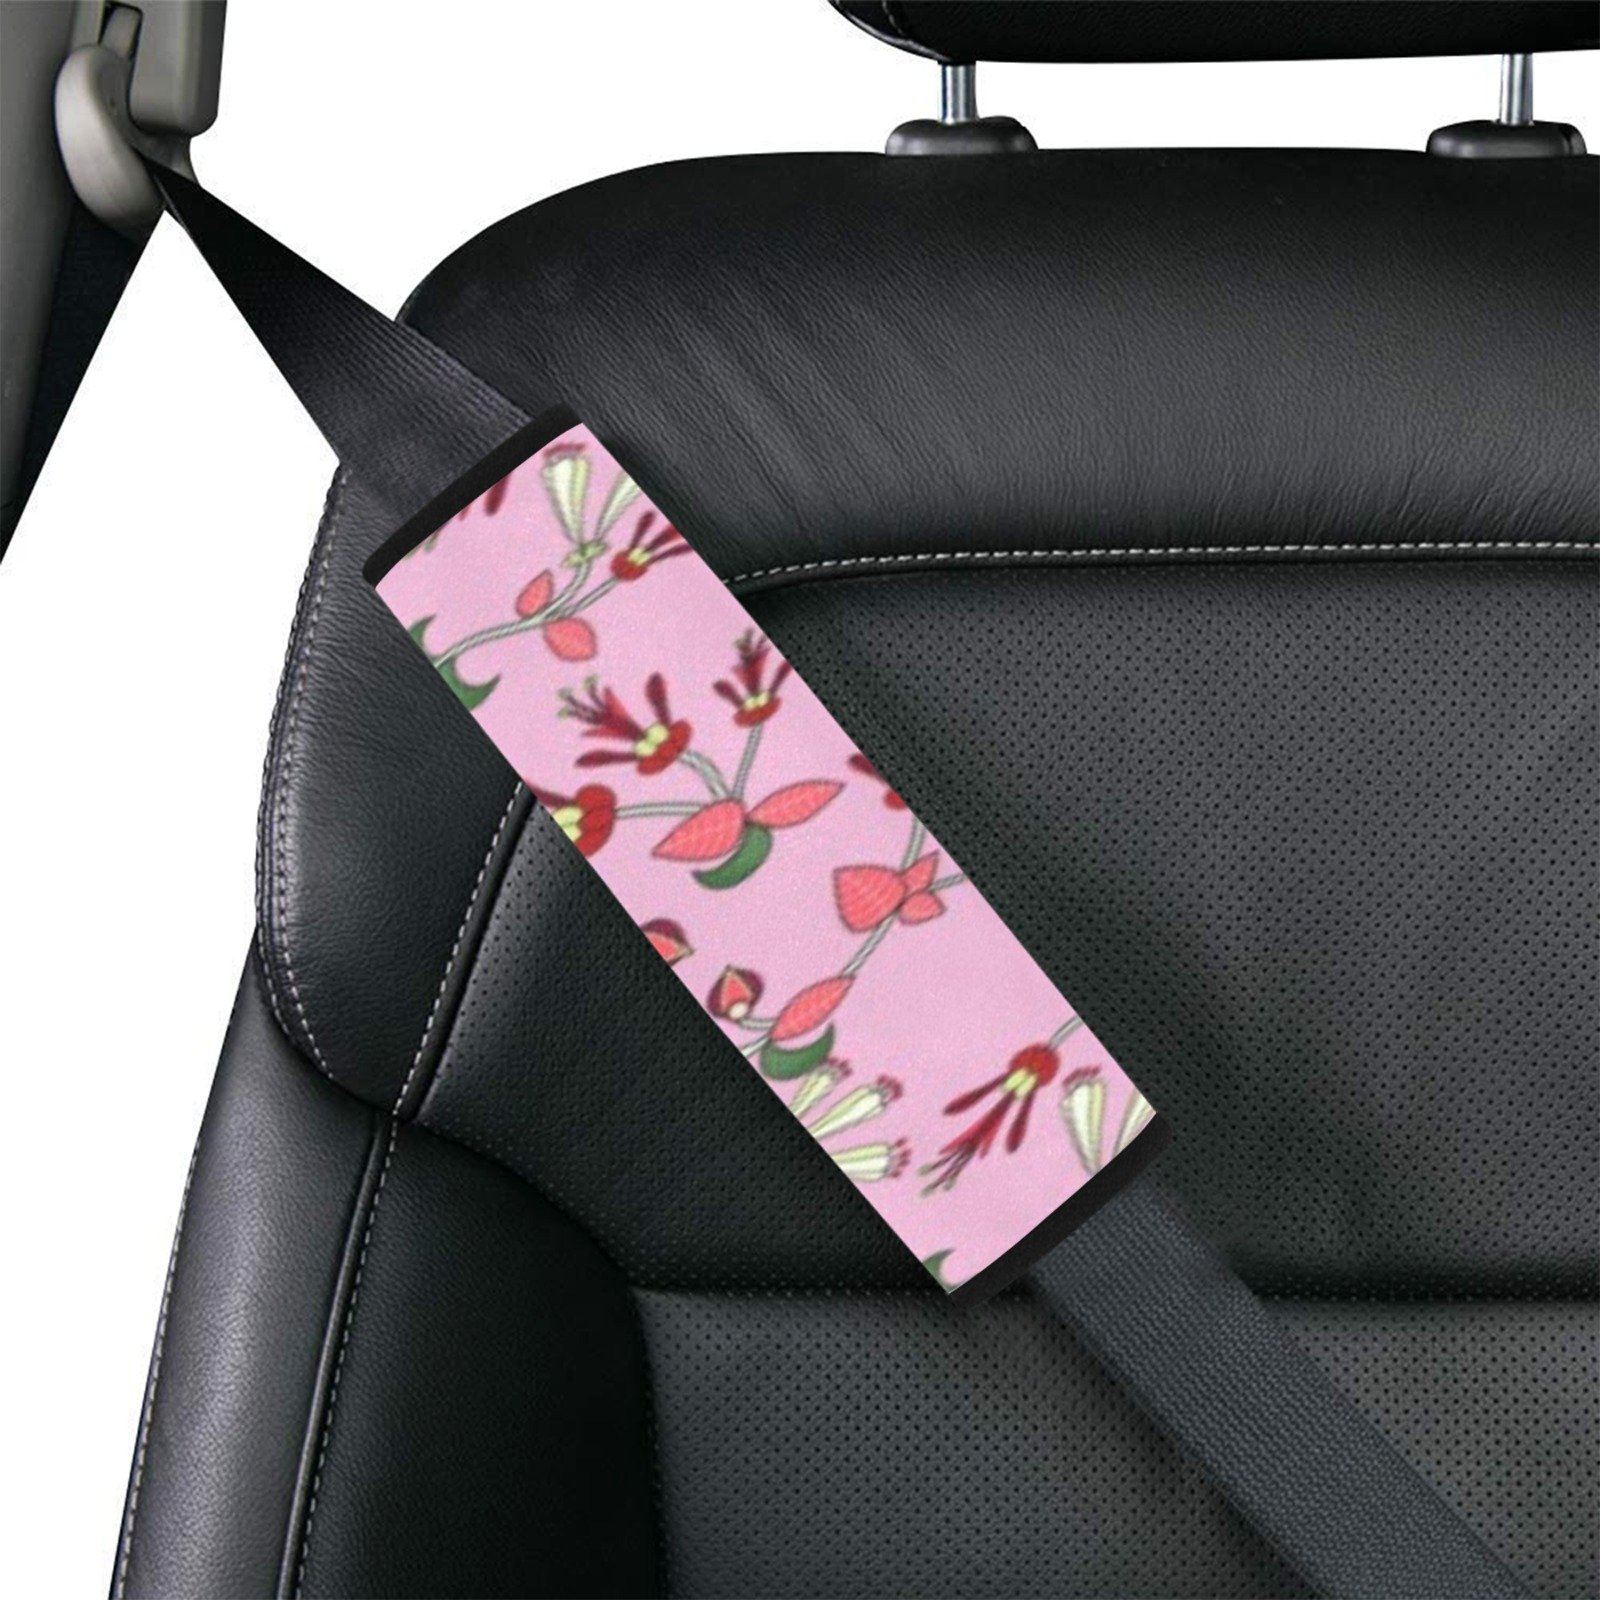 Strawberry Floral Car Seat Belt Cover 7''x12.6'' (Pack of 2) Car Seat Belt Cover 7x12.6 (Pack of 2) e-joyer 